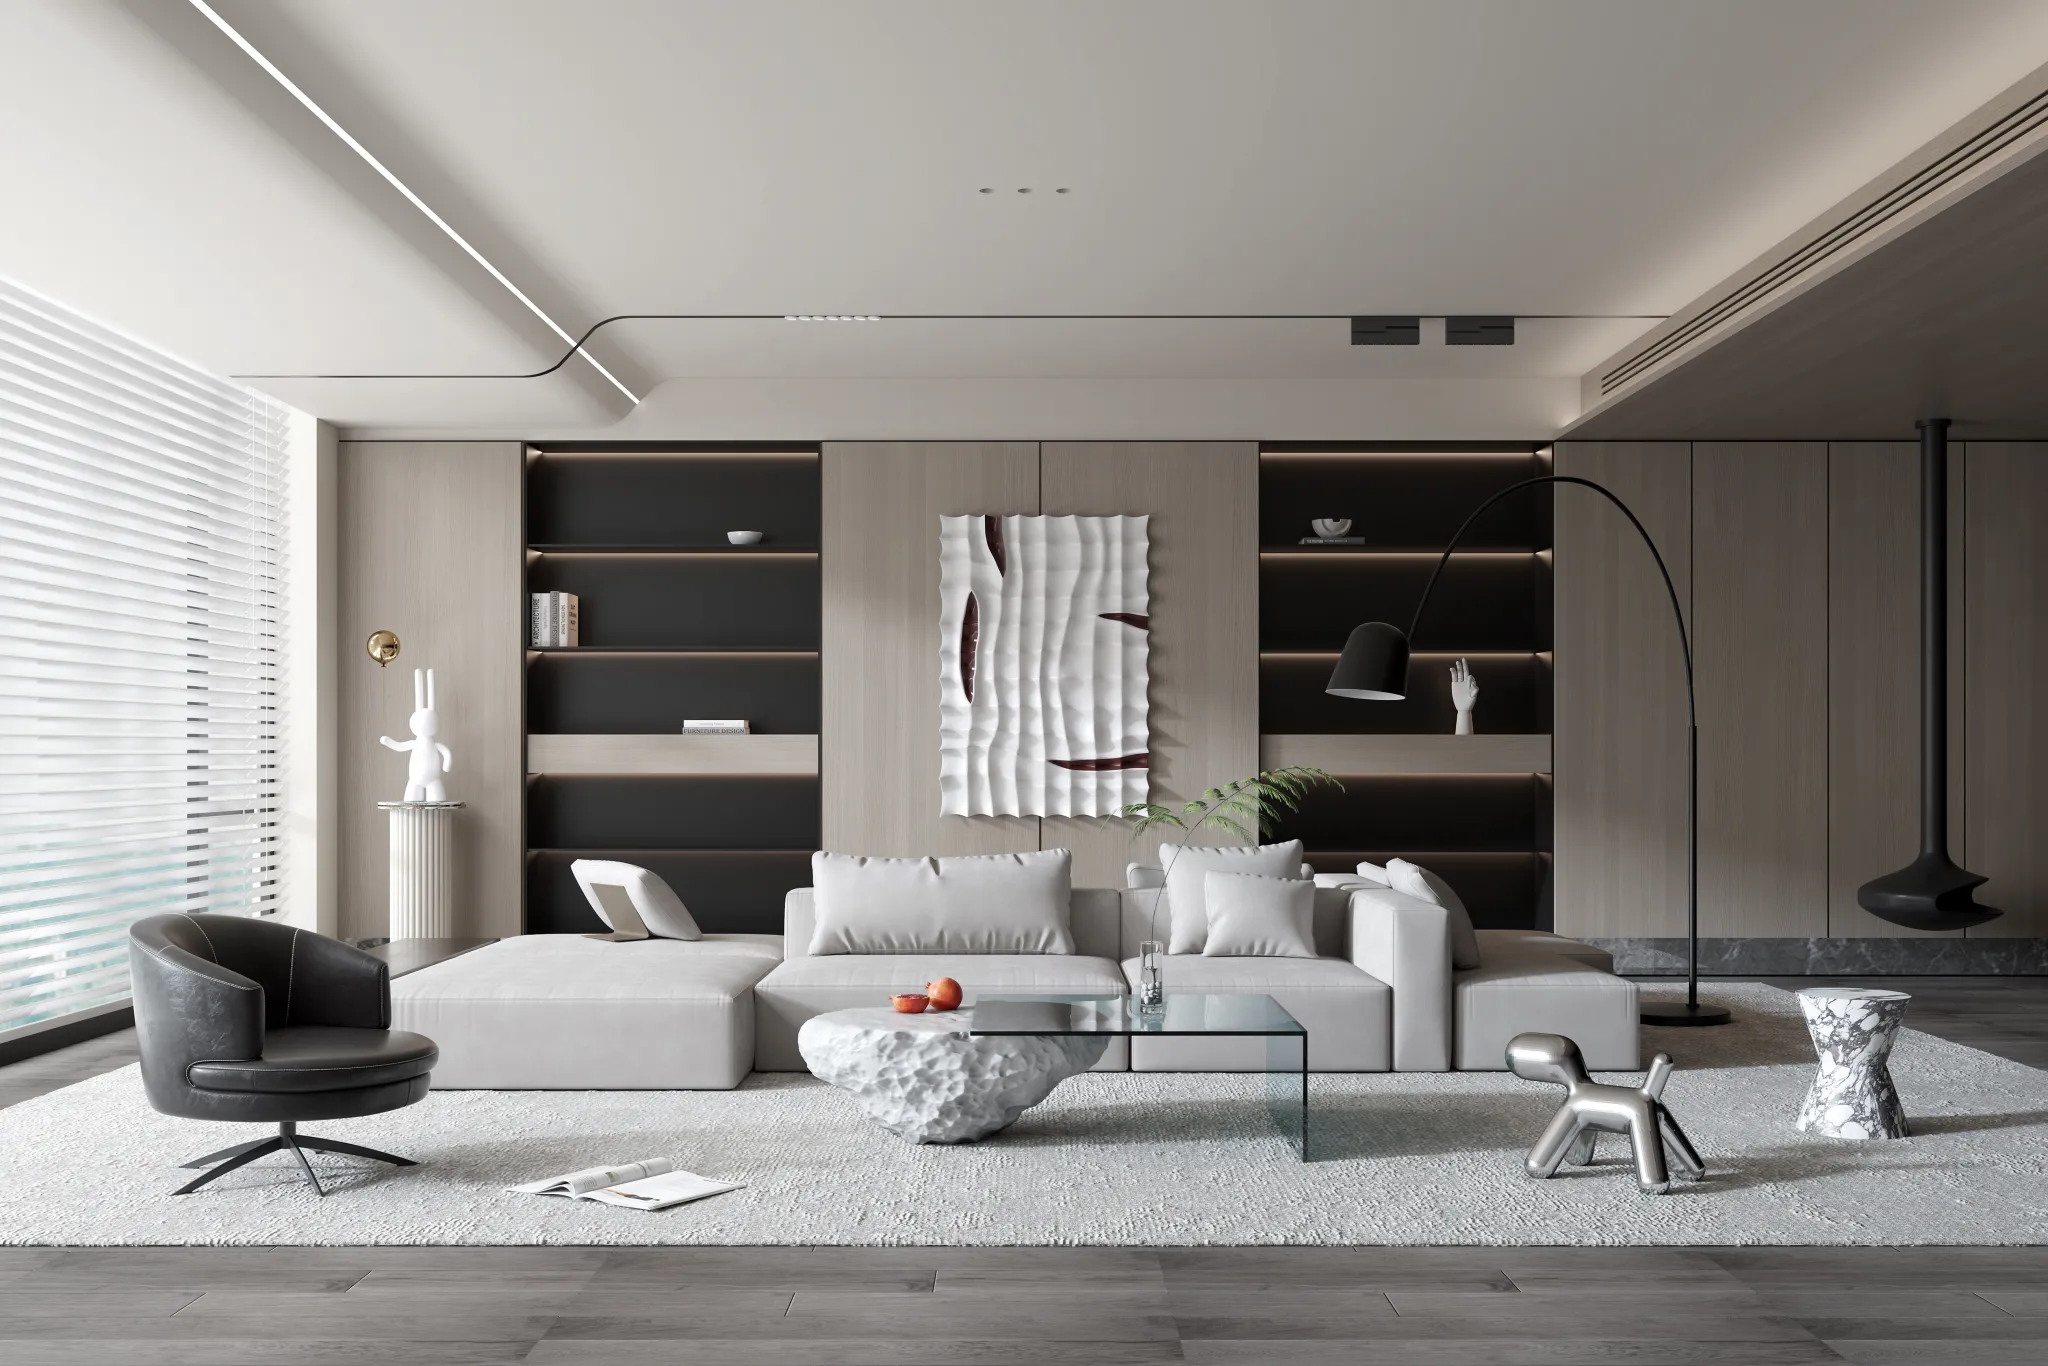 HOUSE SPACE 3D SCENES – LIVING ROOM – 0159